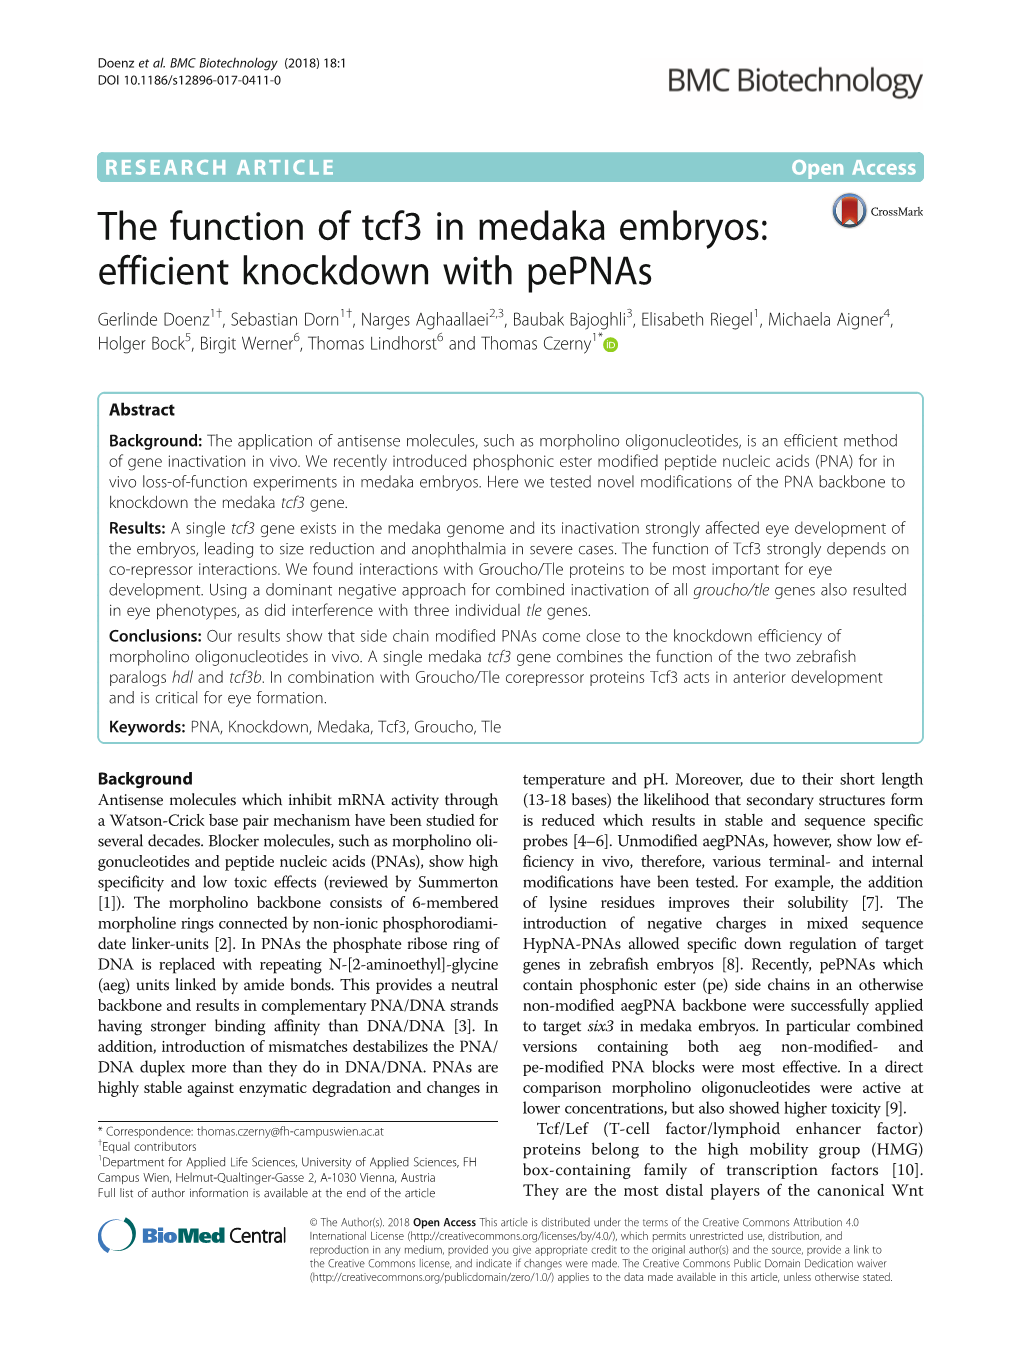 The Function of Tcf3 in Medaka Embryos: Efficient Knockdown With